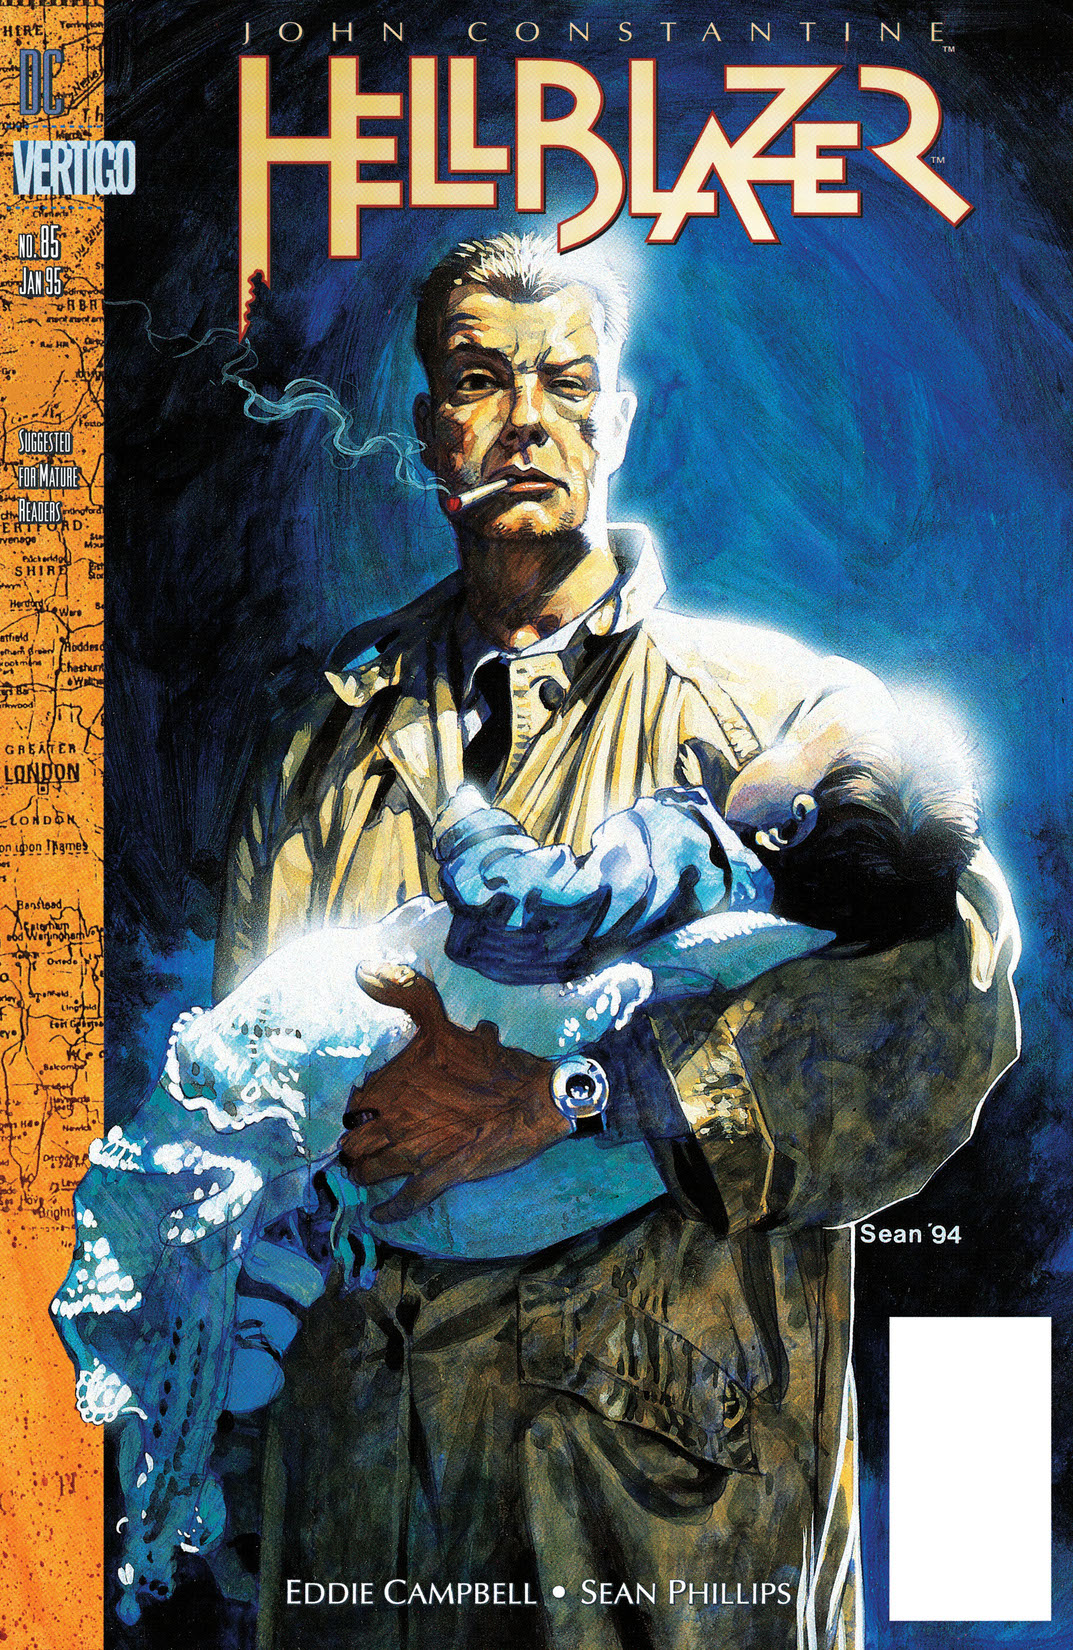 Hellblazer #85 preview images